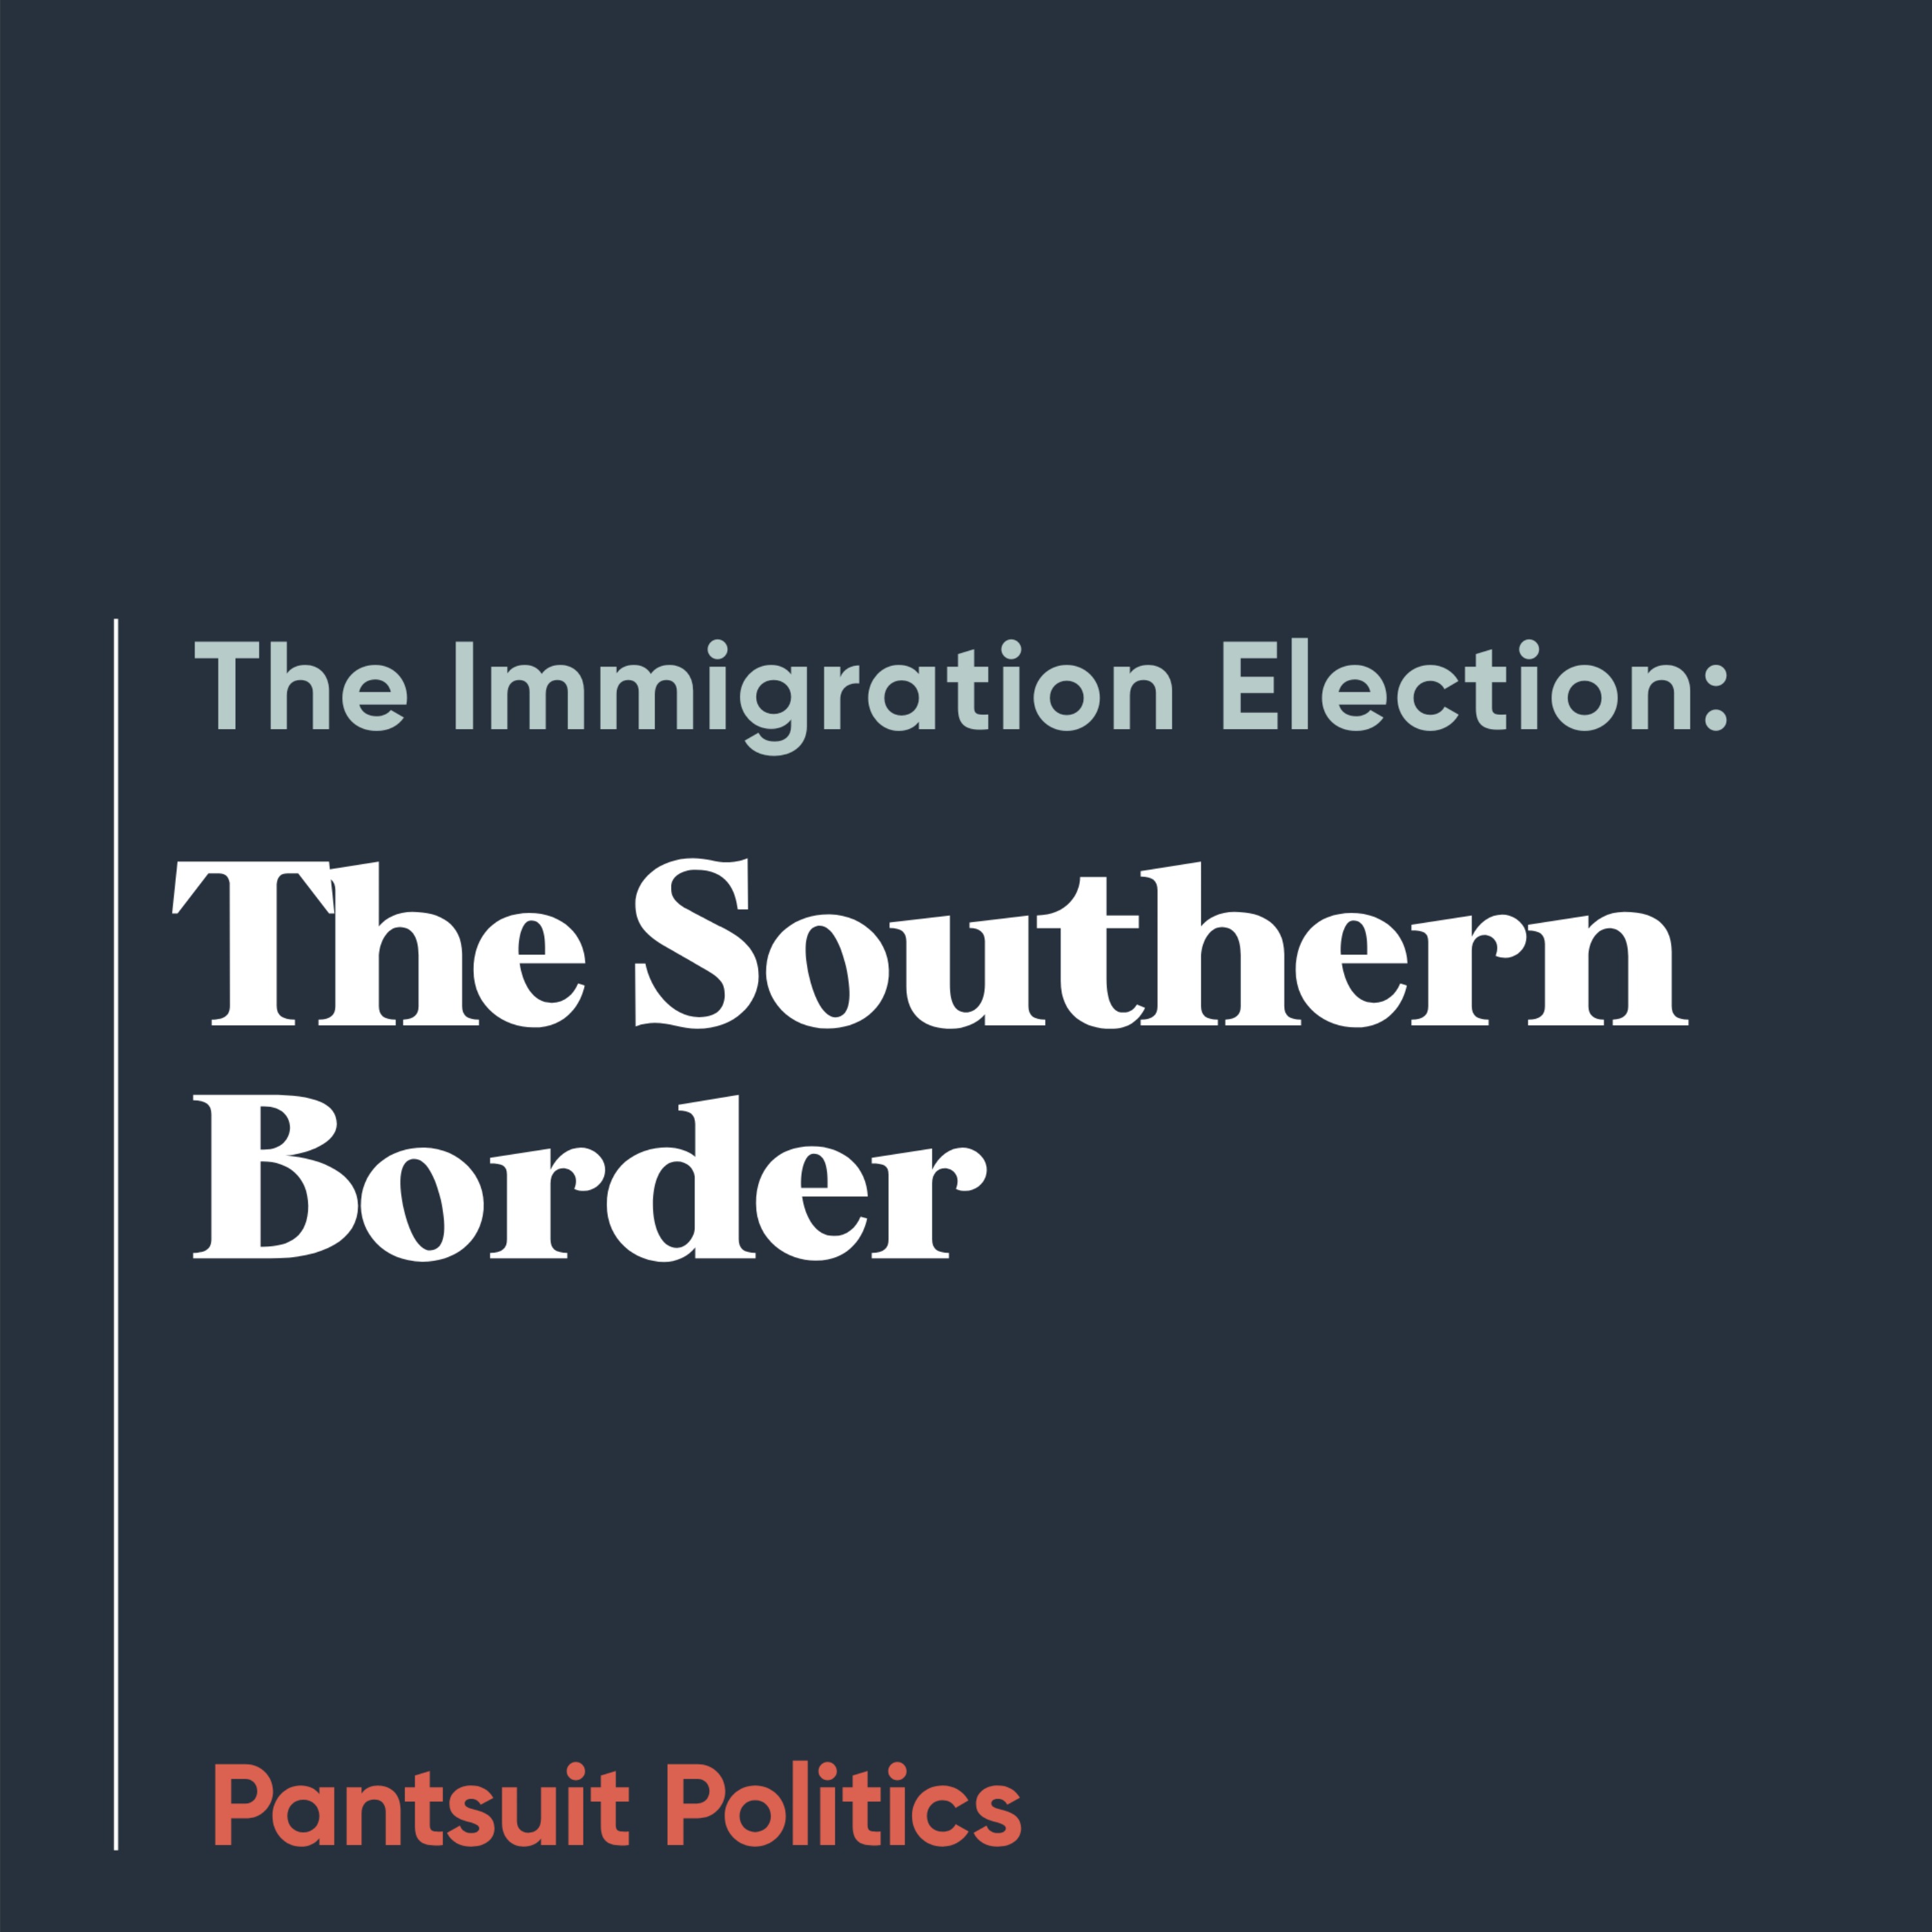 The Immigration Election: The Southern Border